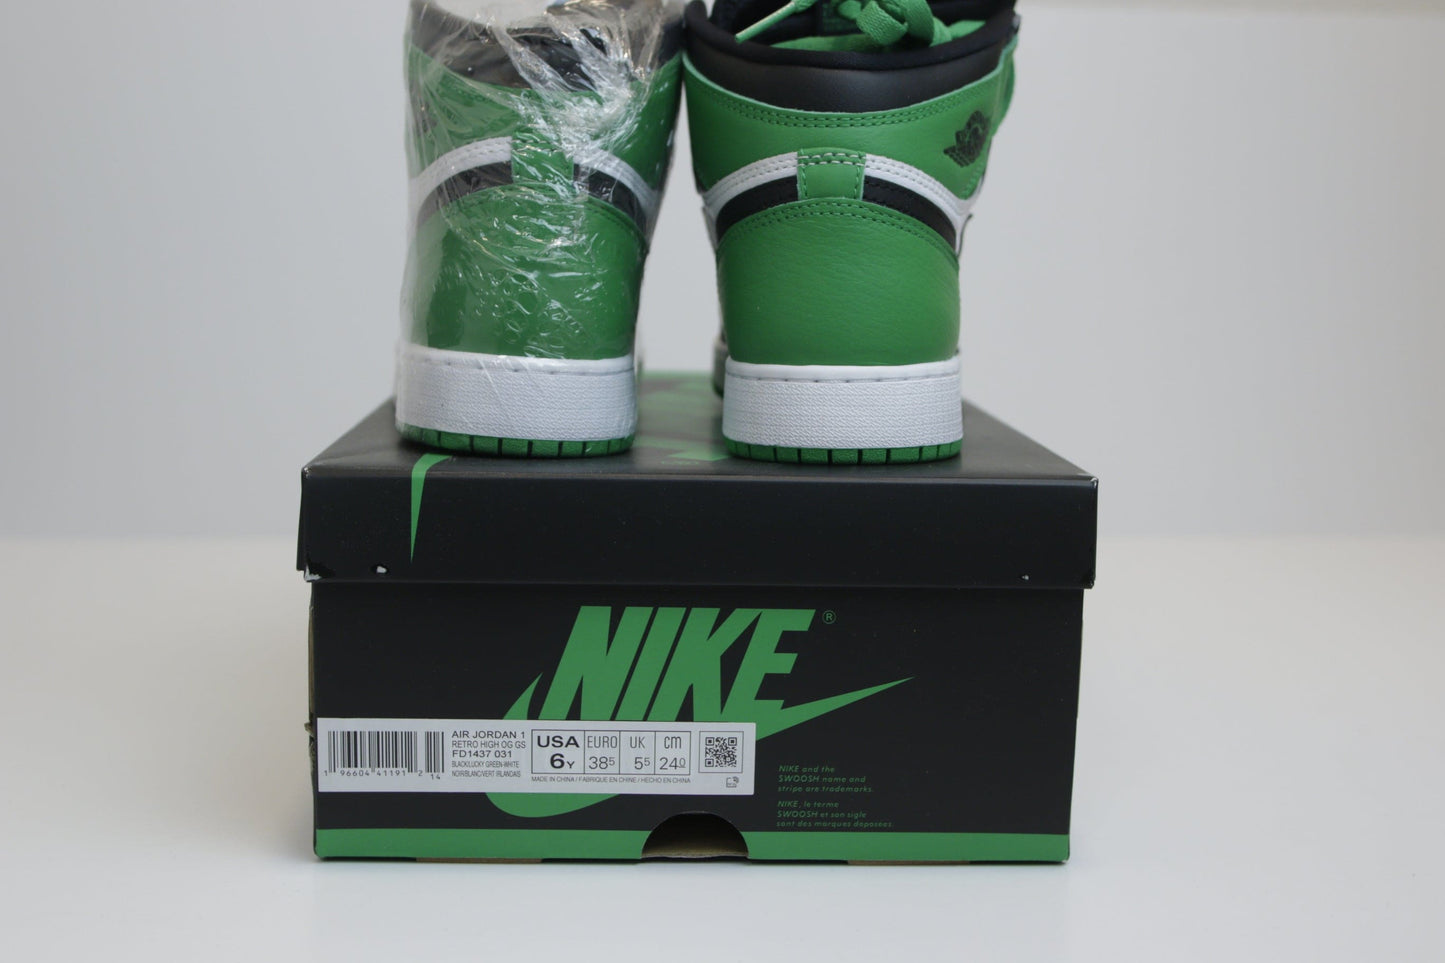 AJ1 LUCKY GREEN DS SIZE 6Y